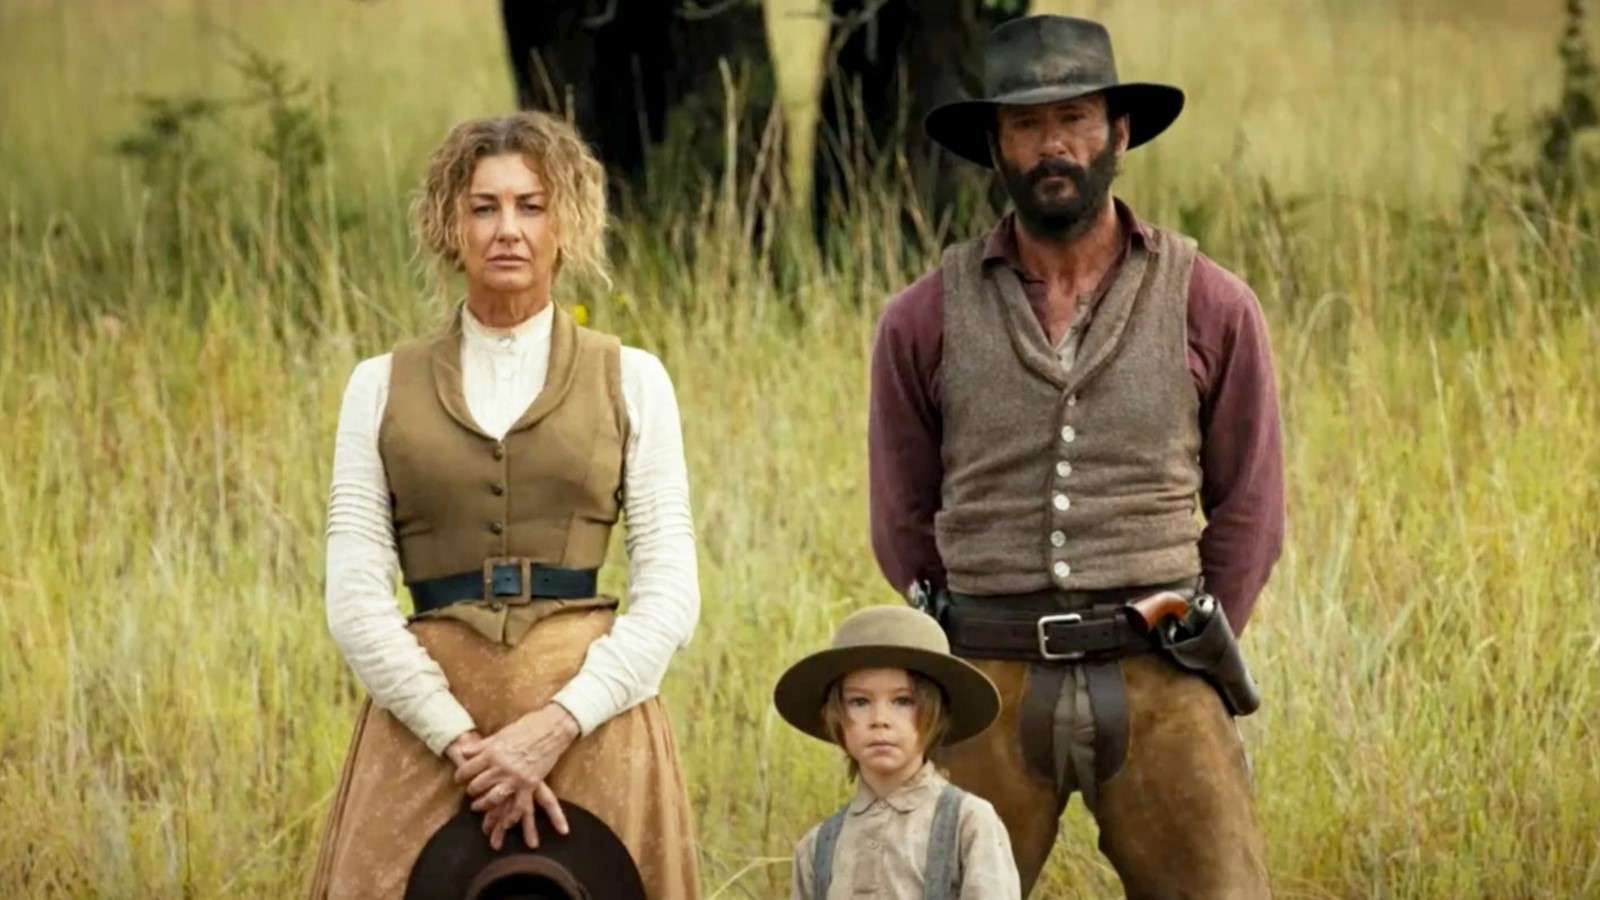 Yellowstone 1883: The Dutton family stand together in tall grass, looking at the camera